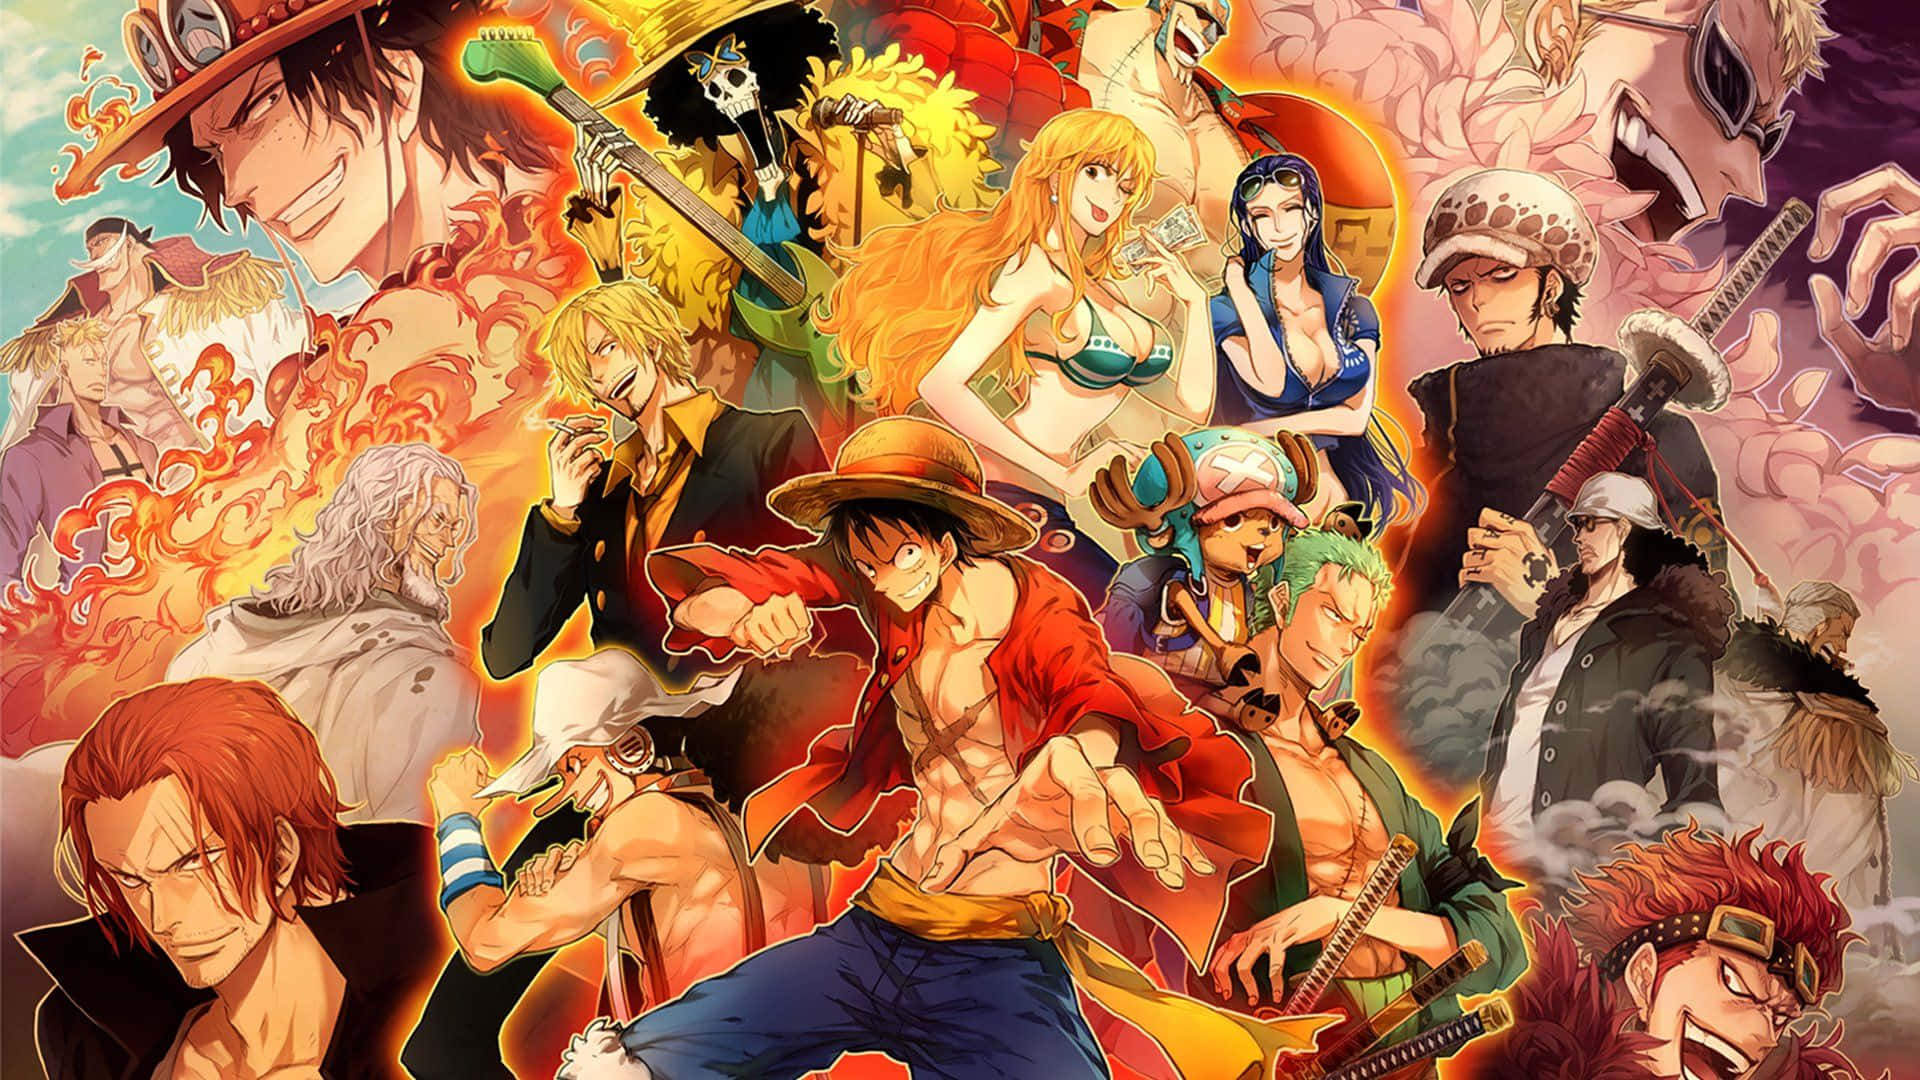 Wallpaper dragon, anime, guy, One Piece for mobile and desktop